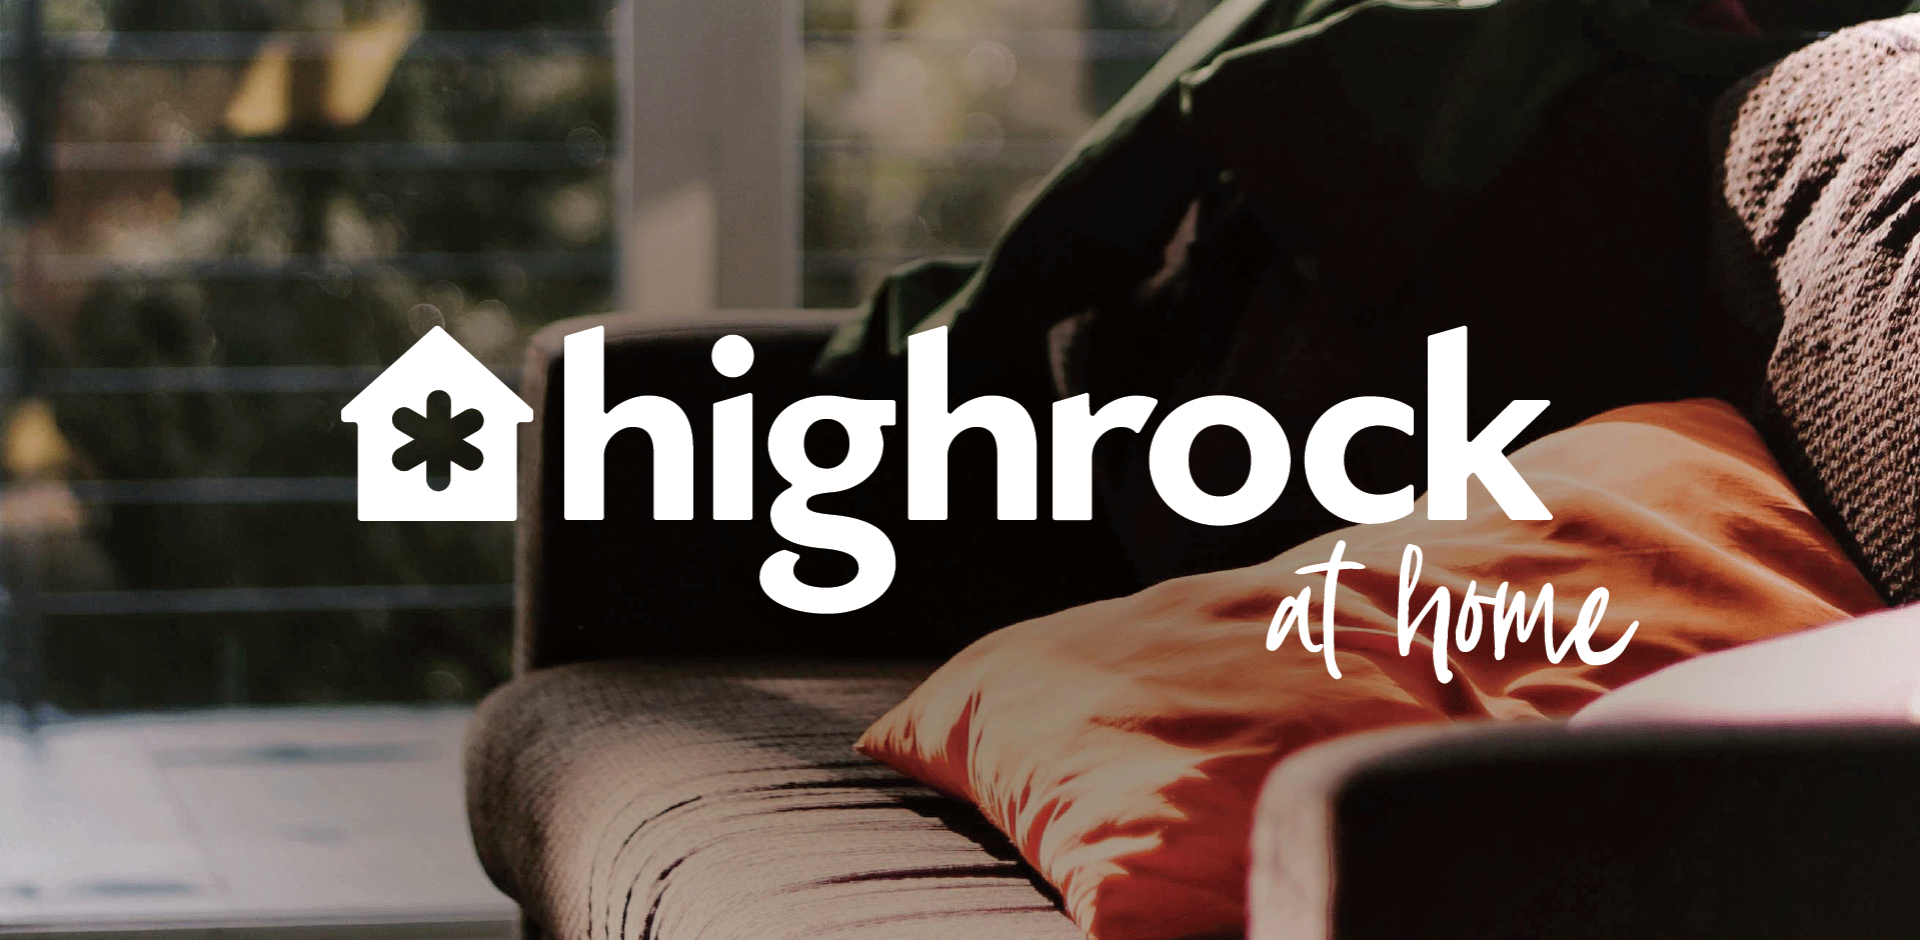 Highrock at Home 2020 - Event small